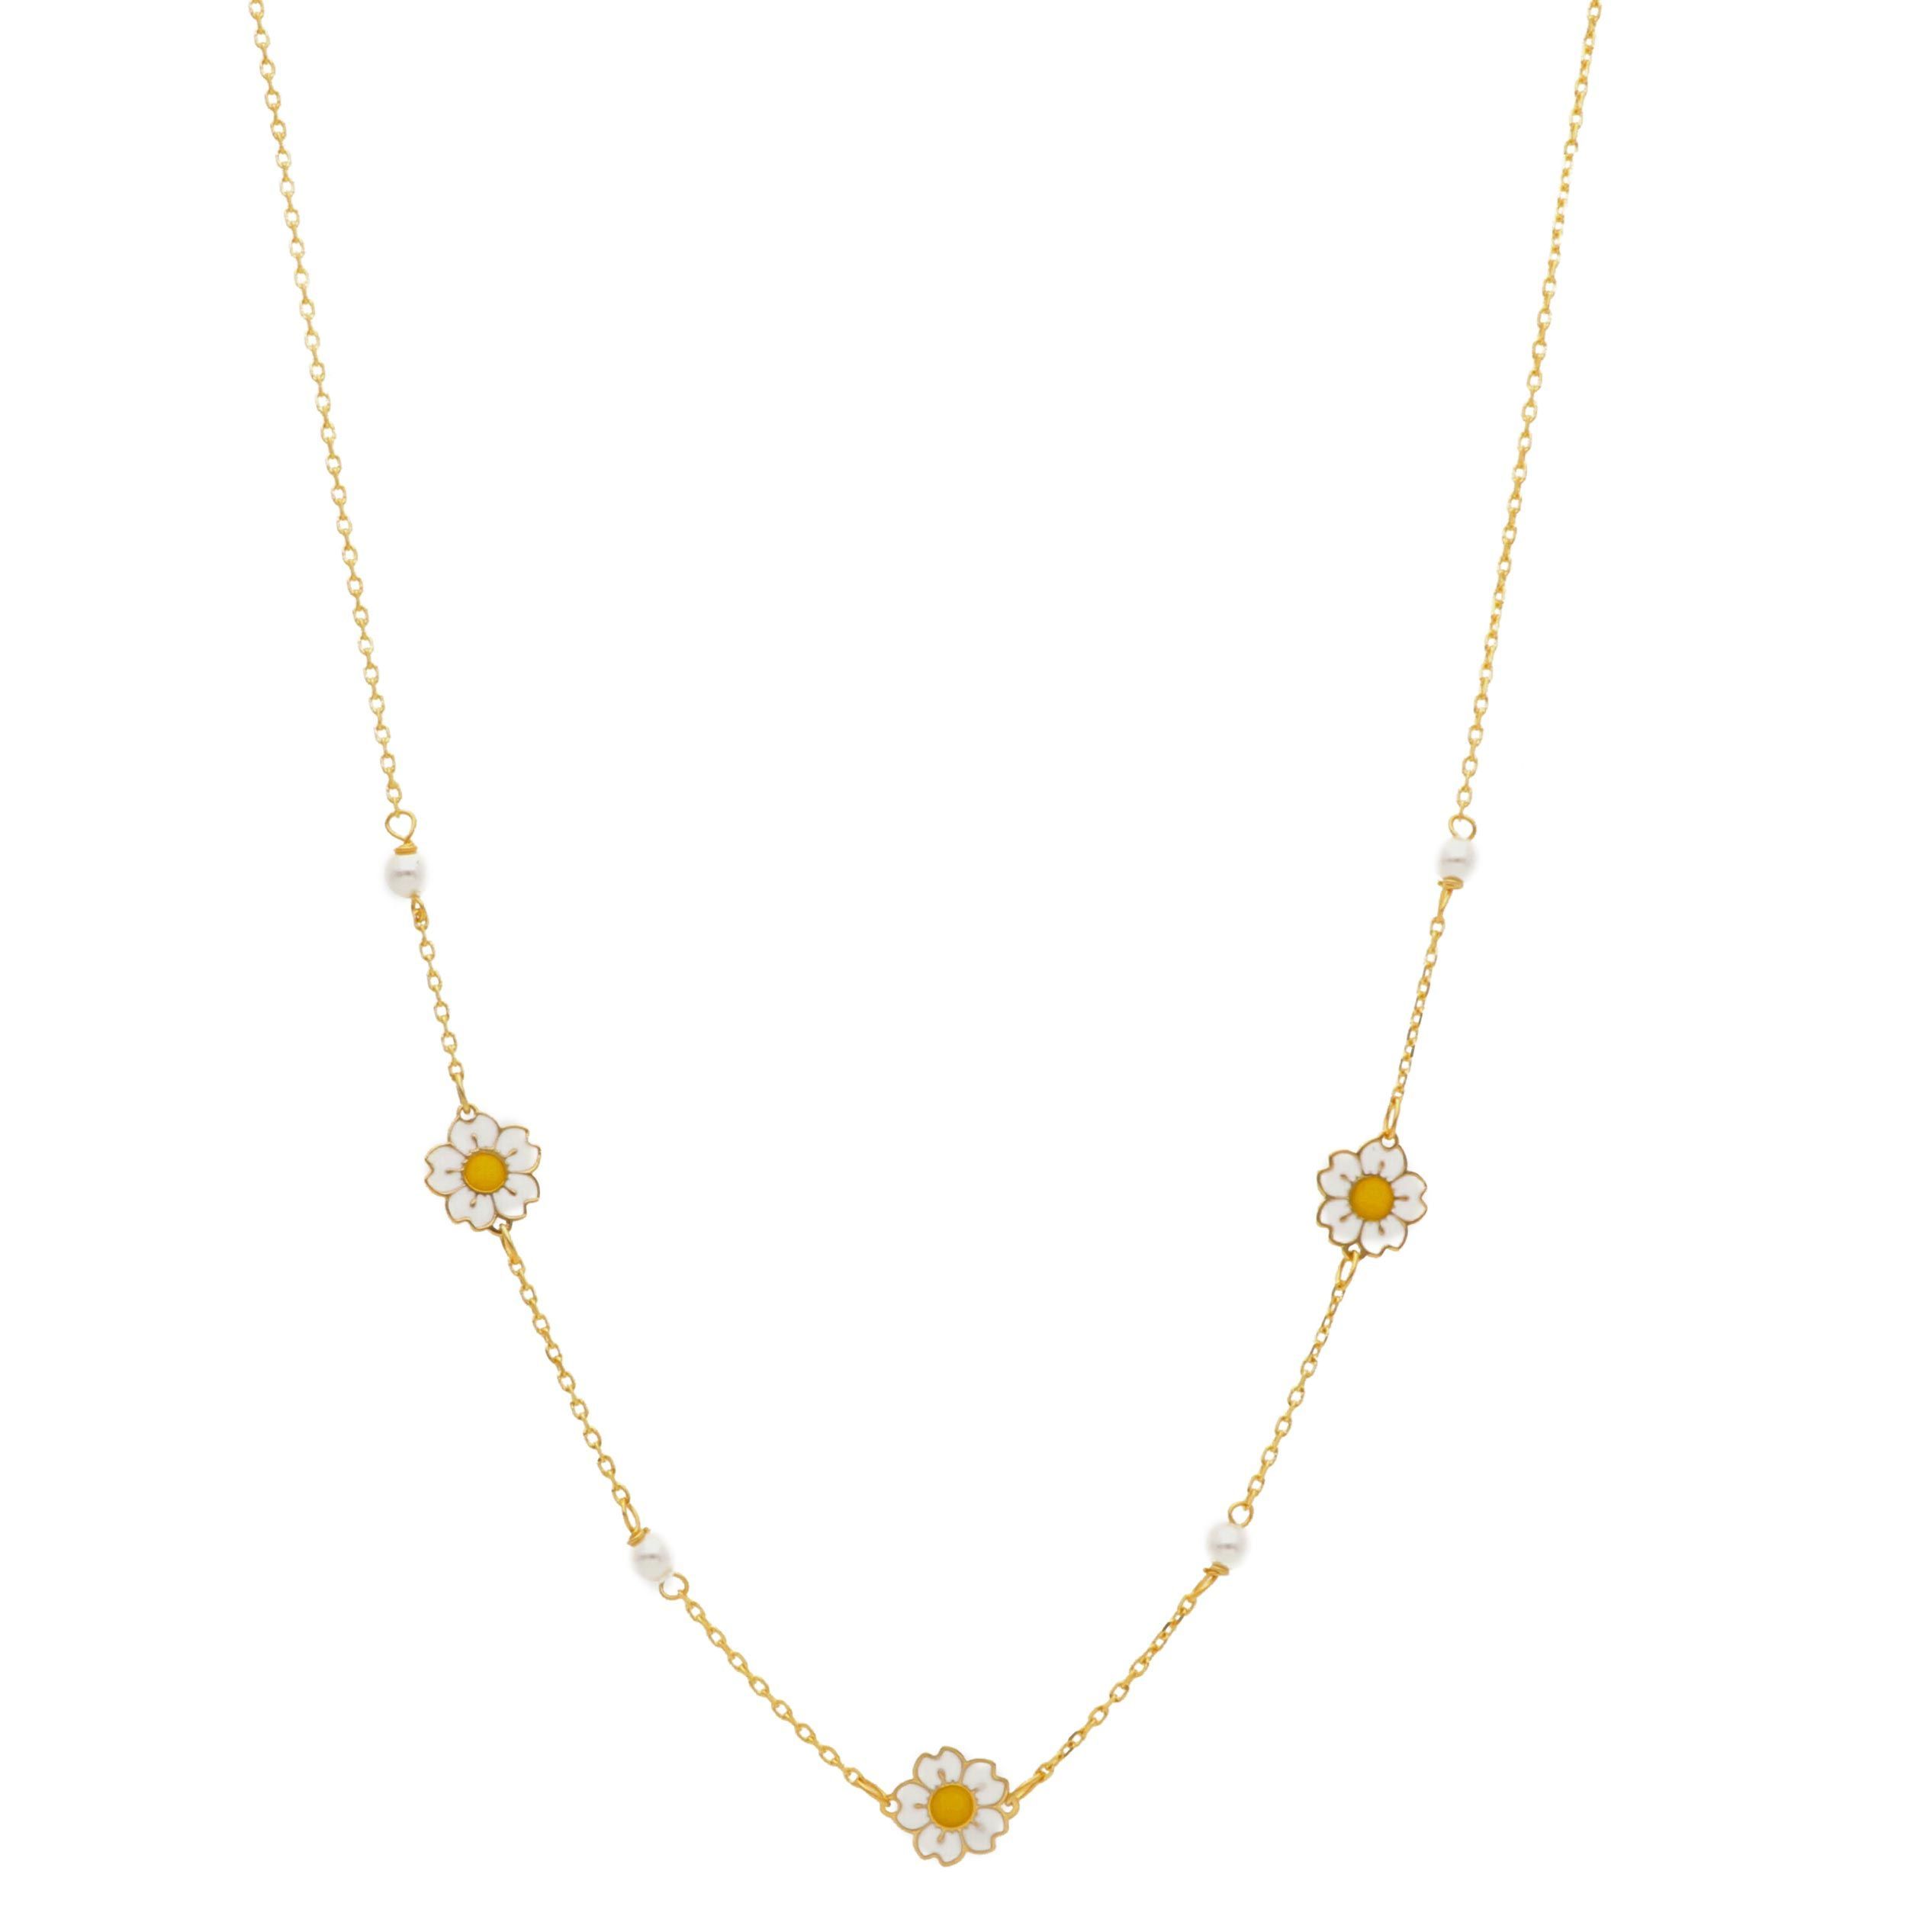 Yellow gold necklace k14 (code S272364)